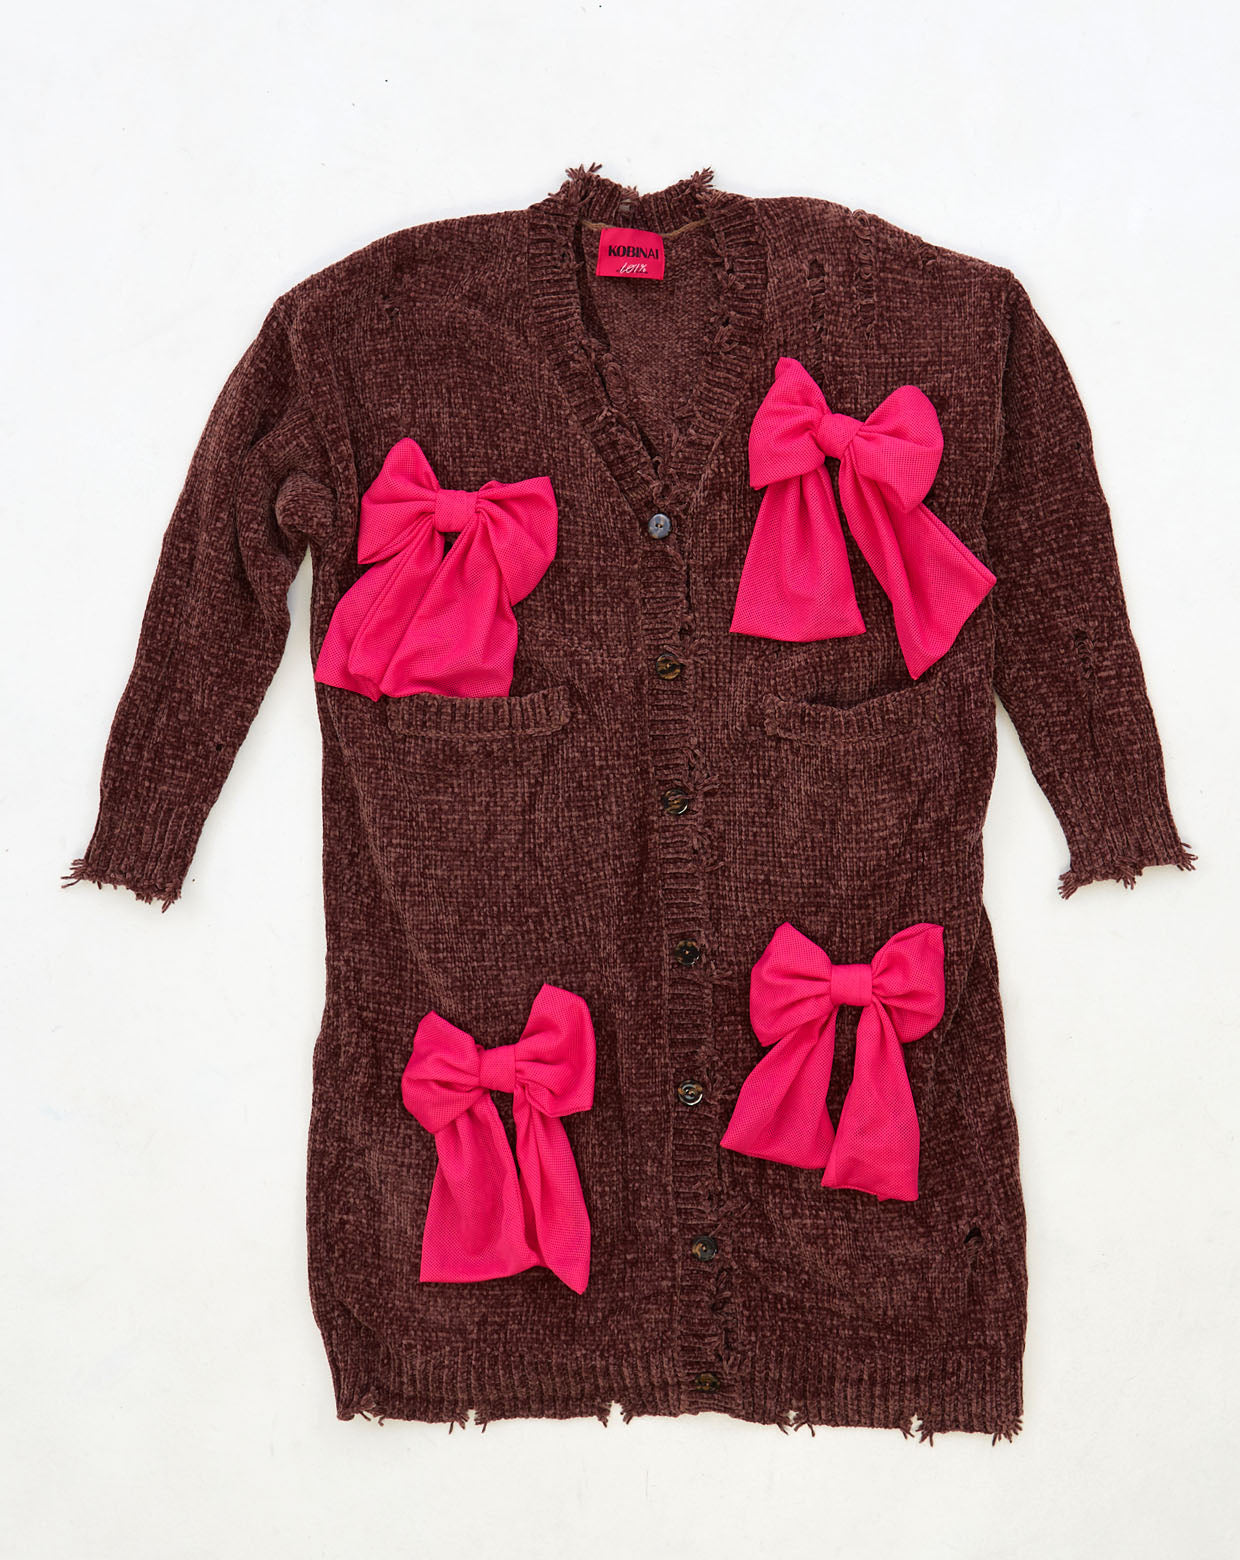 PARTY Cardigan-PINK